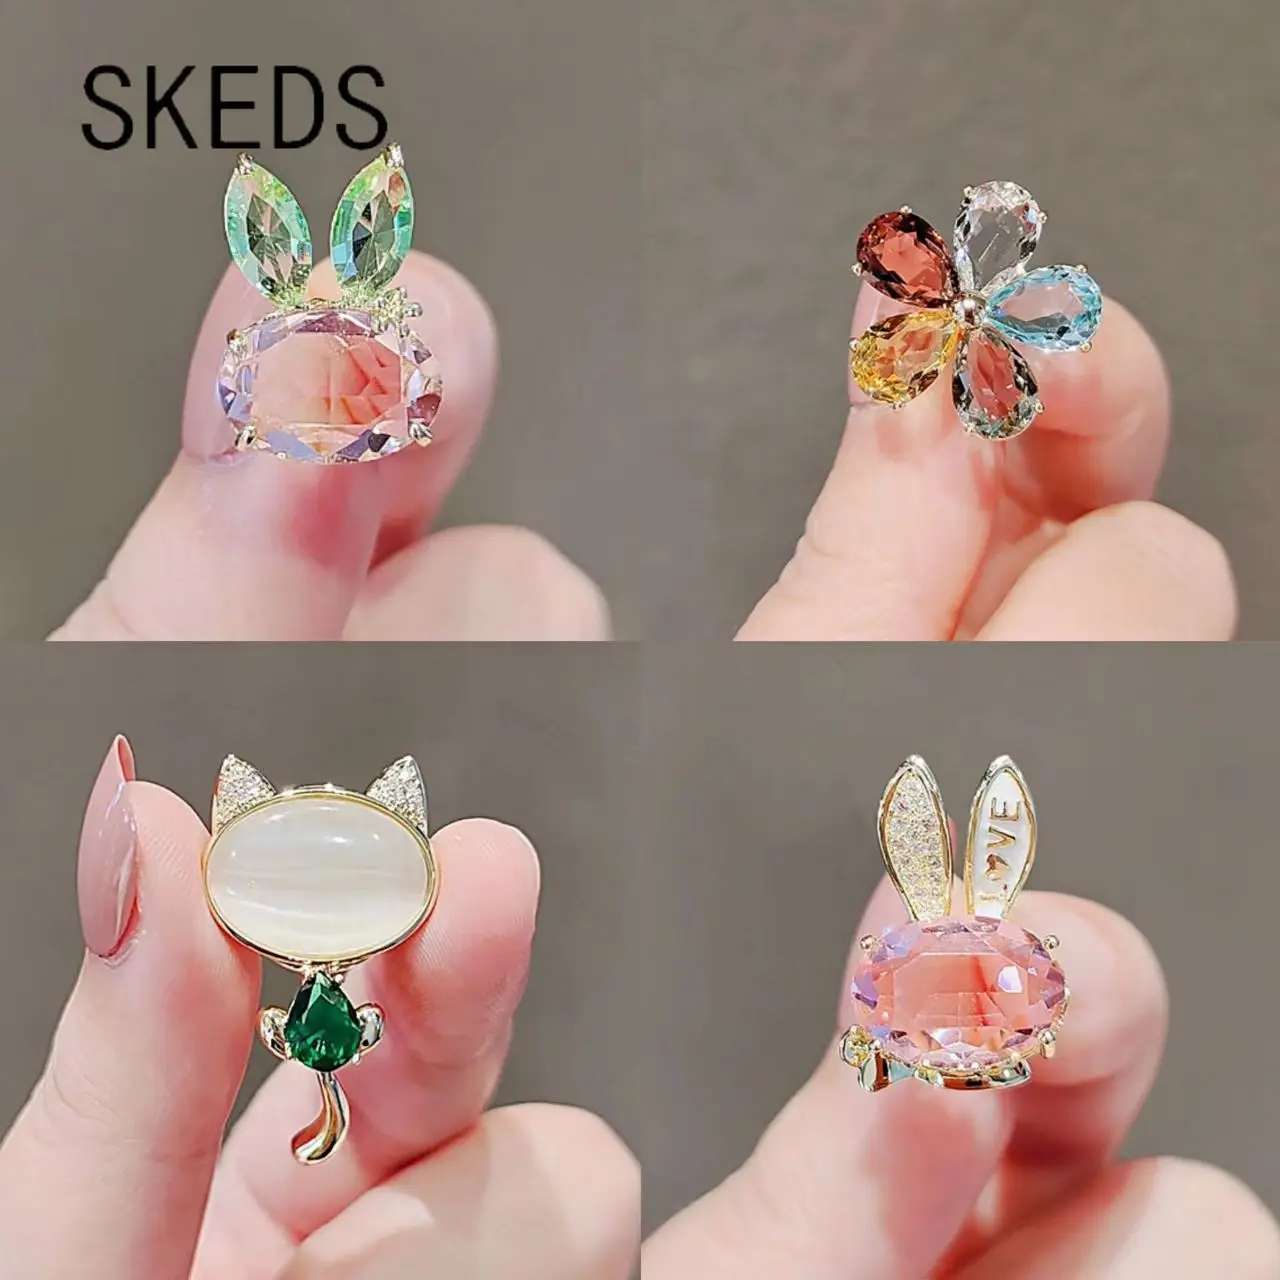 

SKEDS Trendy Shiny Rhinestone Rabbit Small Size Brooch Pin Badges For Women Lady Clothing Coat Party Accessories Brooches Gift